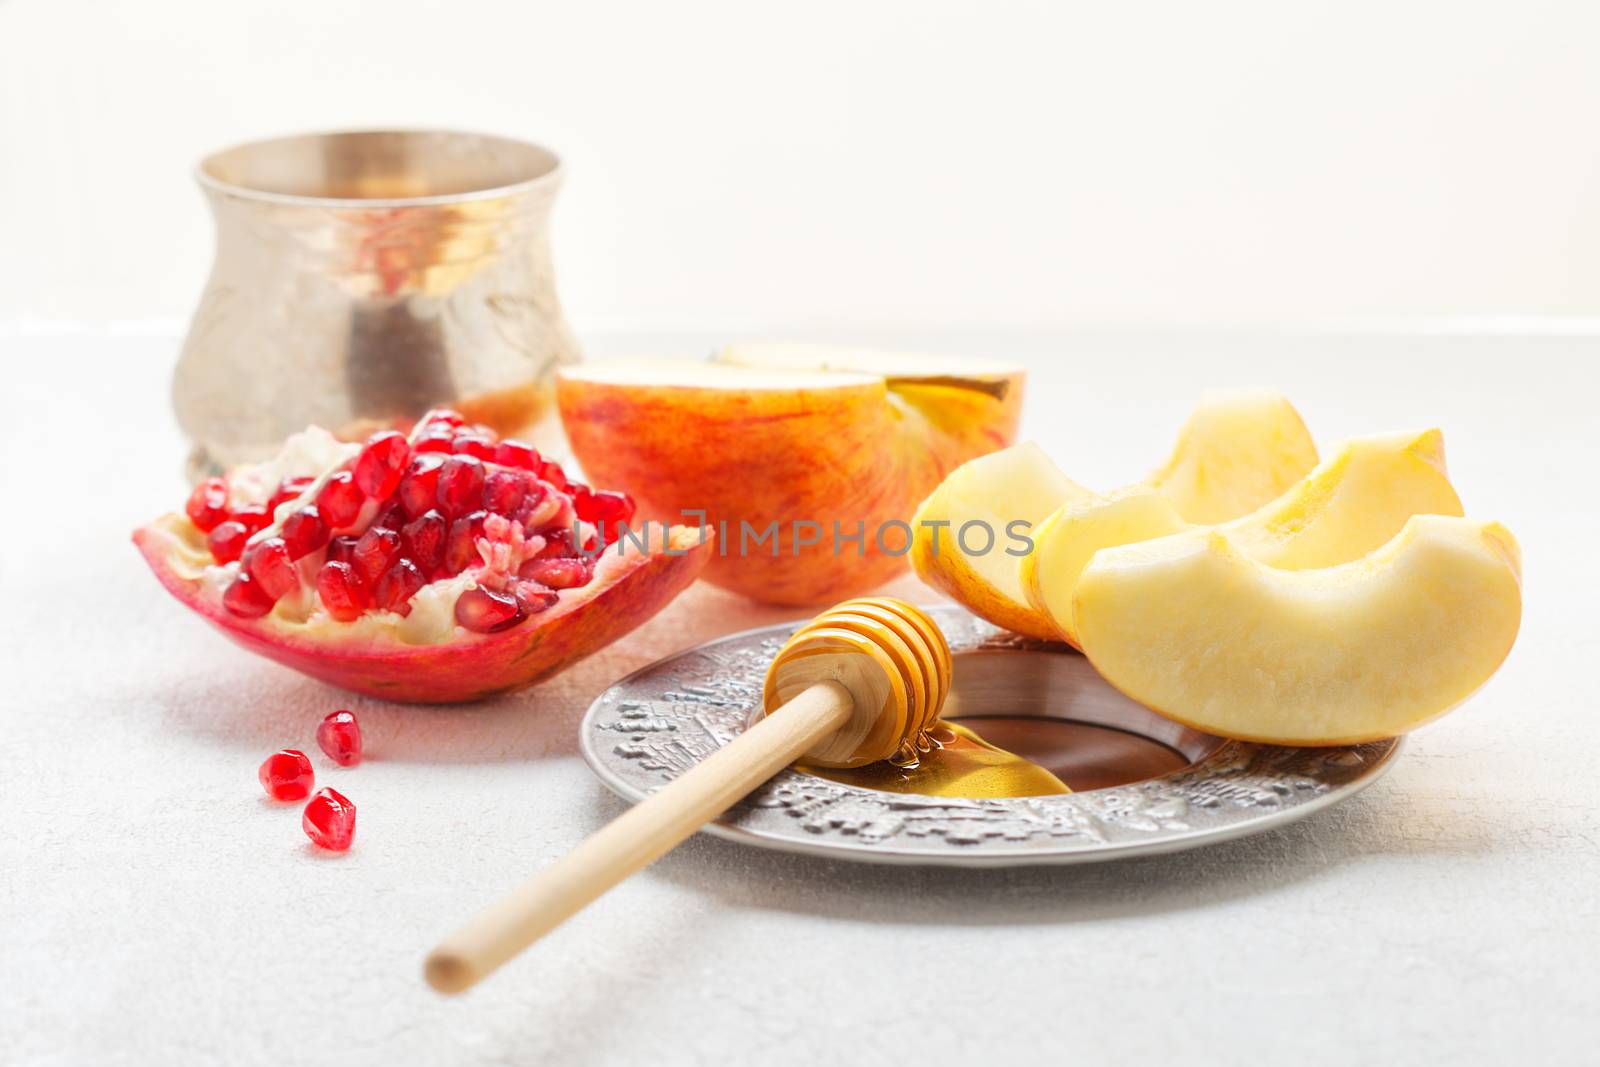 Apples, pomegranate and honey for Rosh Hashanah  by supercat67